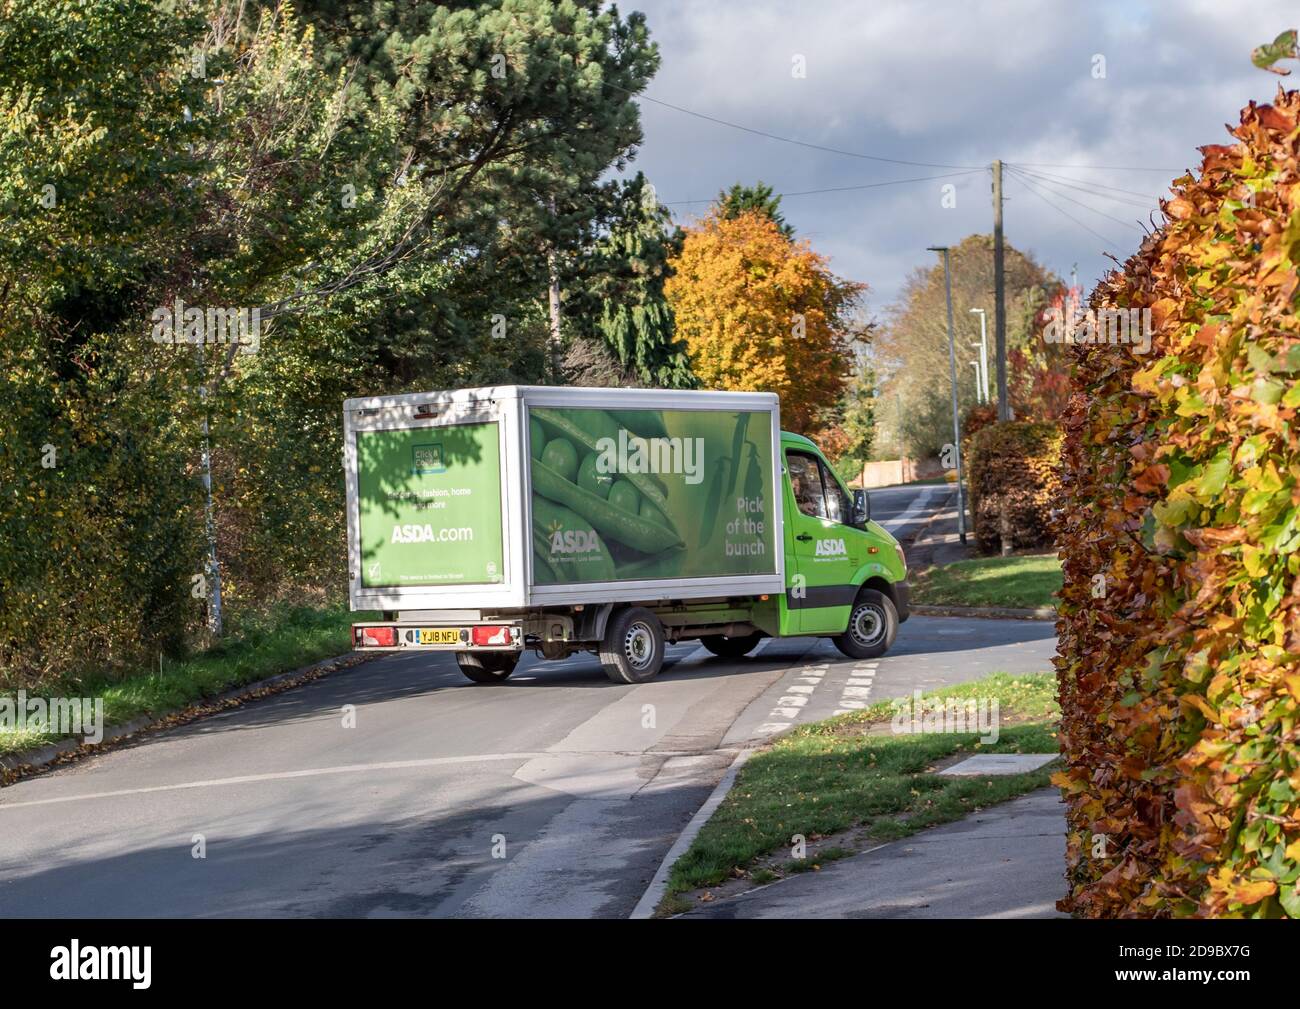 Pocklington, East Yorkshire, England, 03/11/2020 - A green Asda supermatket delivery van turning a corner in the street Stock Photo